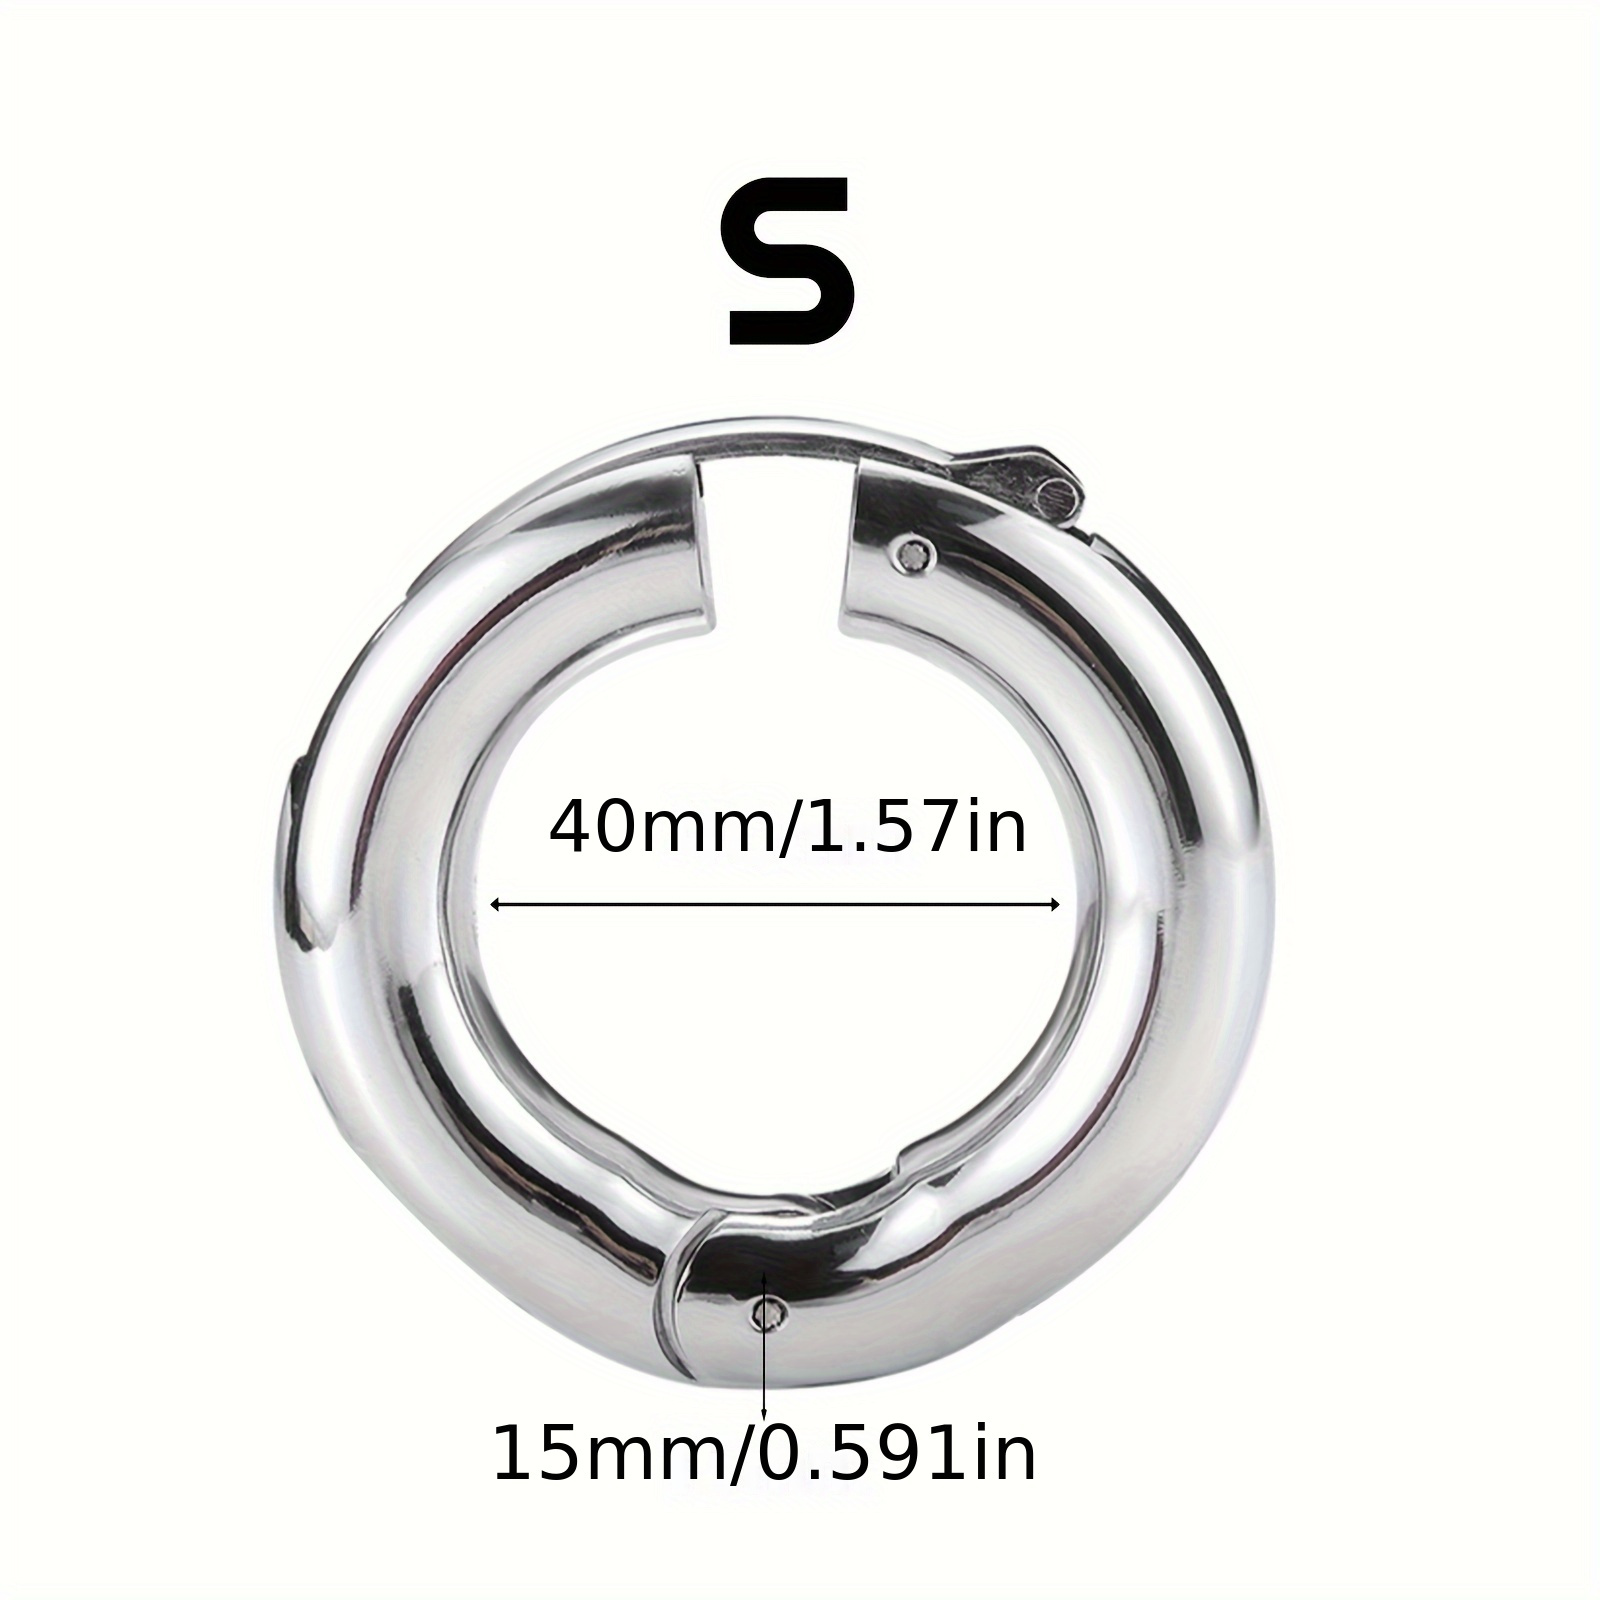 Cock Ring and Ball Stretcher Weight - Surgical Steel Stretching Tool